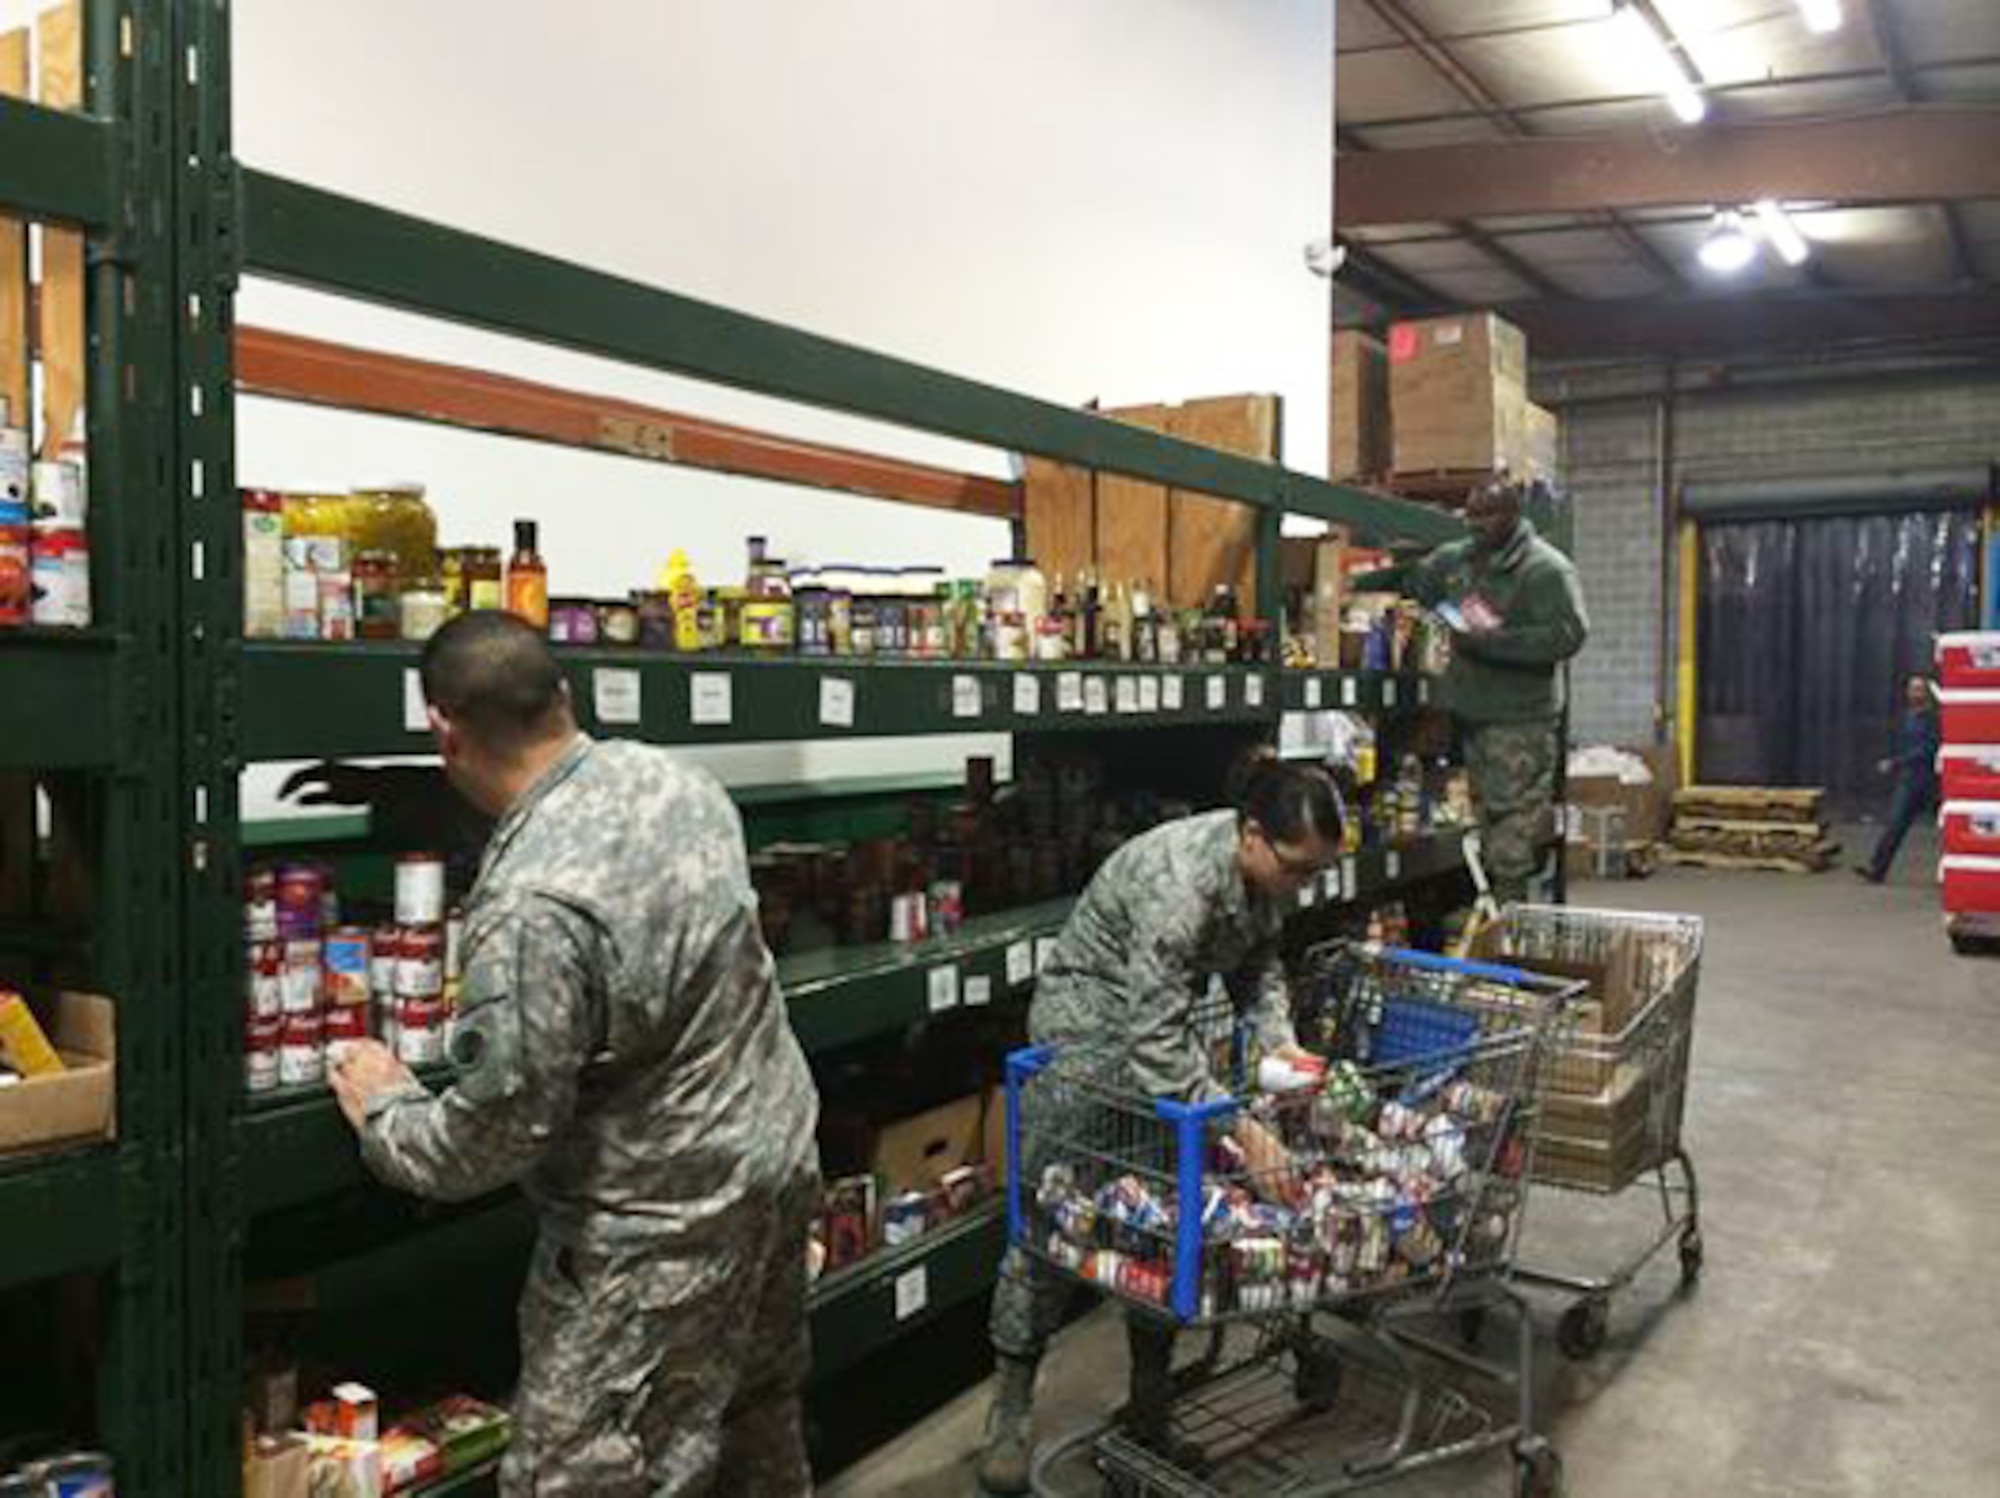 Members of the Delaware Air and Army National Guard volunteer at the Food Bank of Delaware’s Newark warehouse on Dec. 17, 2014. Through the Delaware National Guard’s “War on Hunger,” Guard Airmen, Soldiers and their families have collected more than 15,000 pounds of food for hungry Delawareans this year. (U.S. Army National Guard photo by Officer candidate Wendy McDougall)